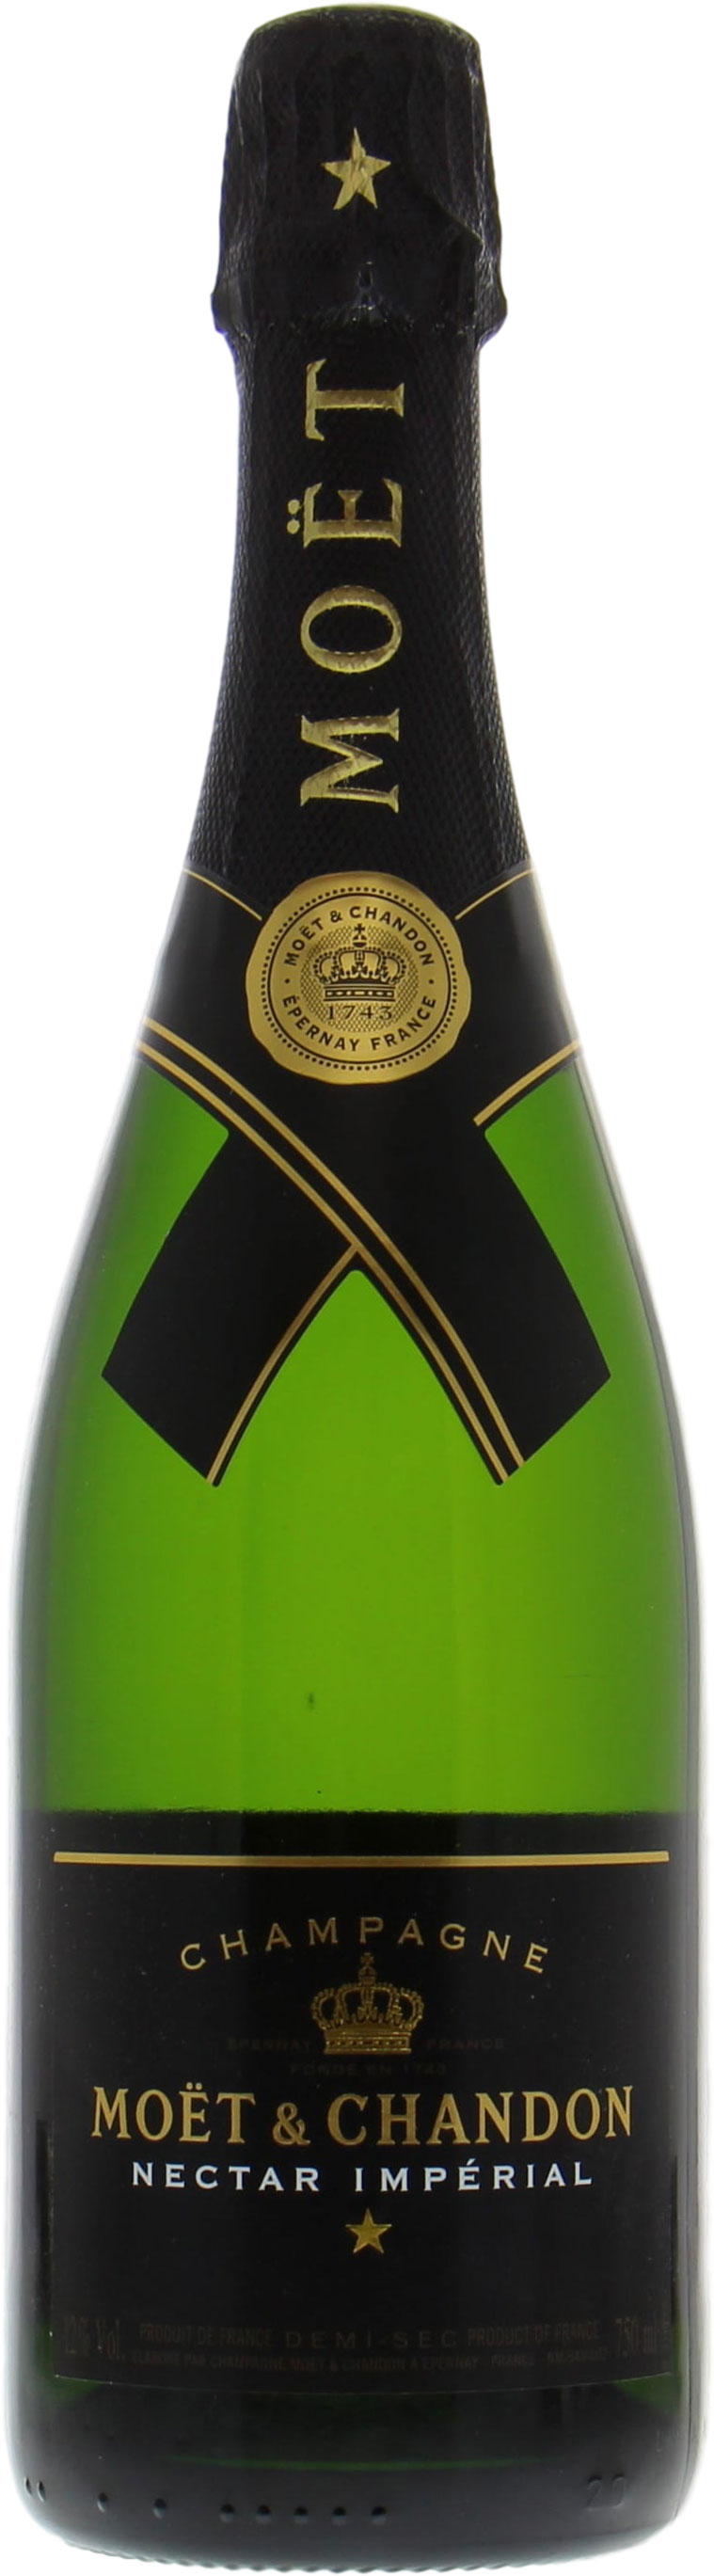 Moet Chandon - Nectar Imperial NV